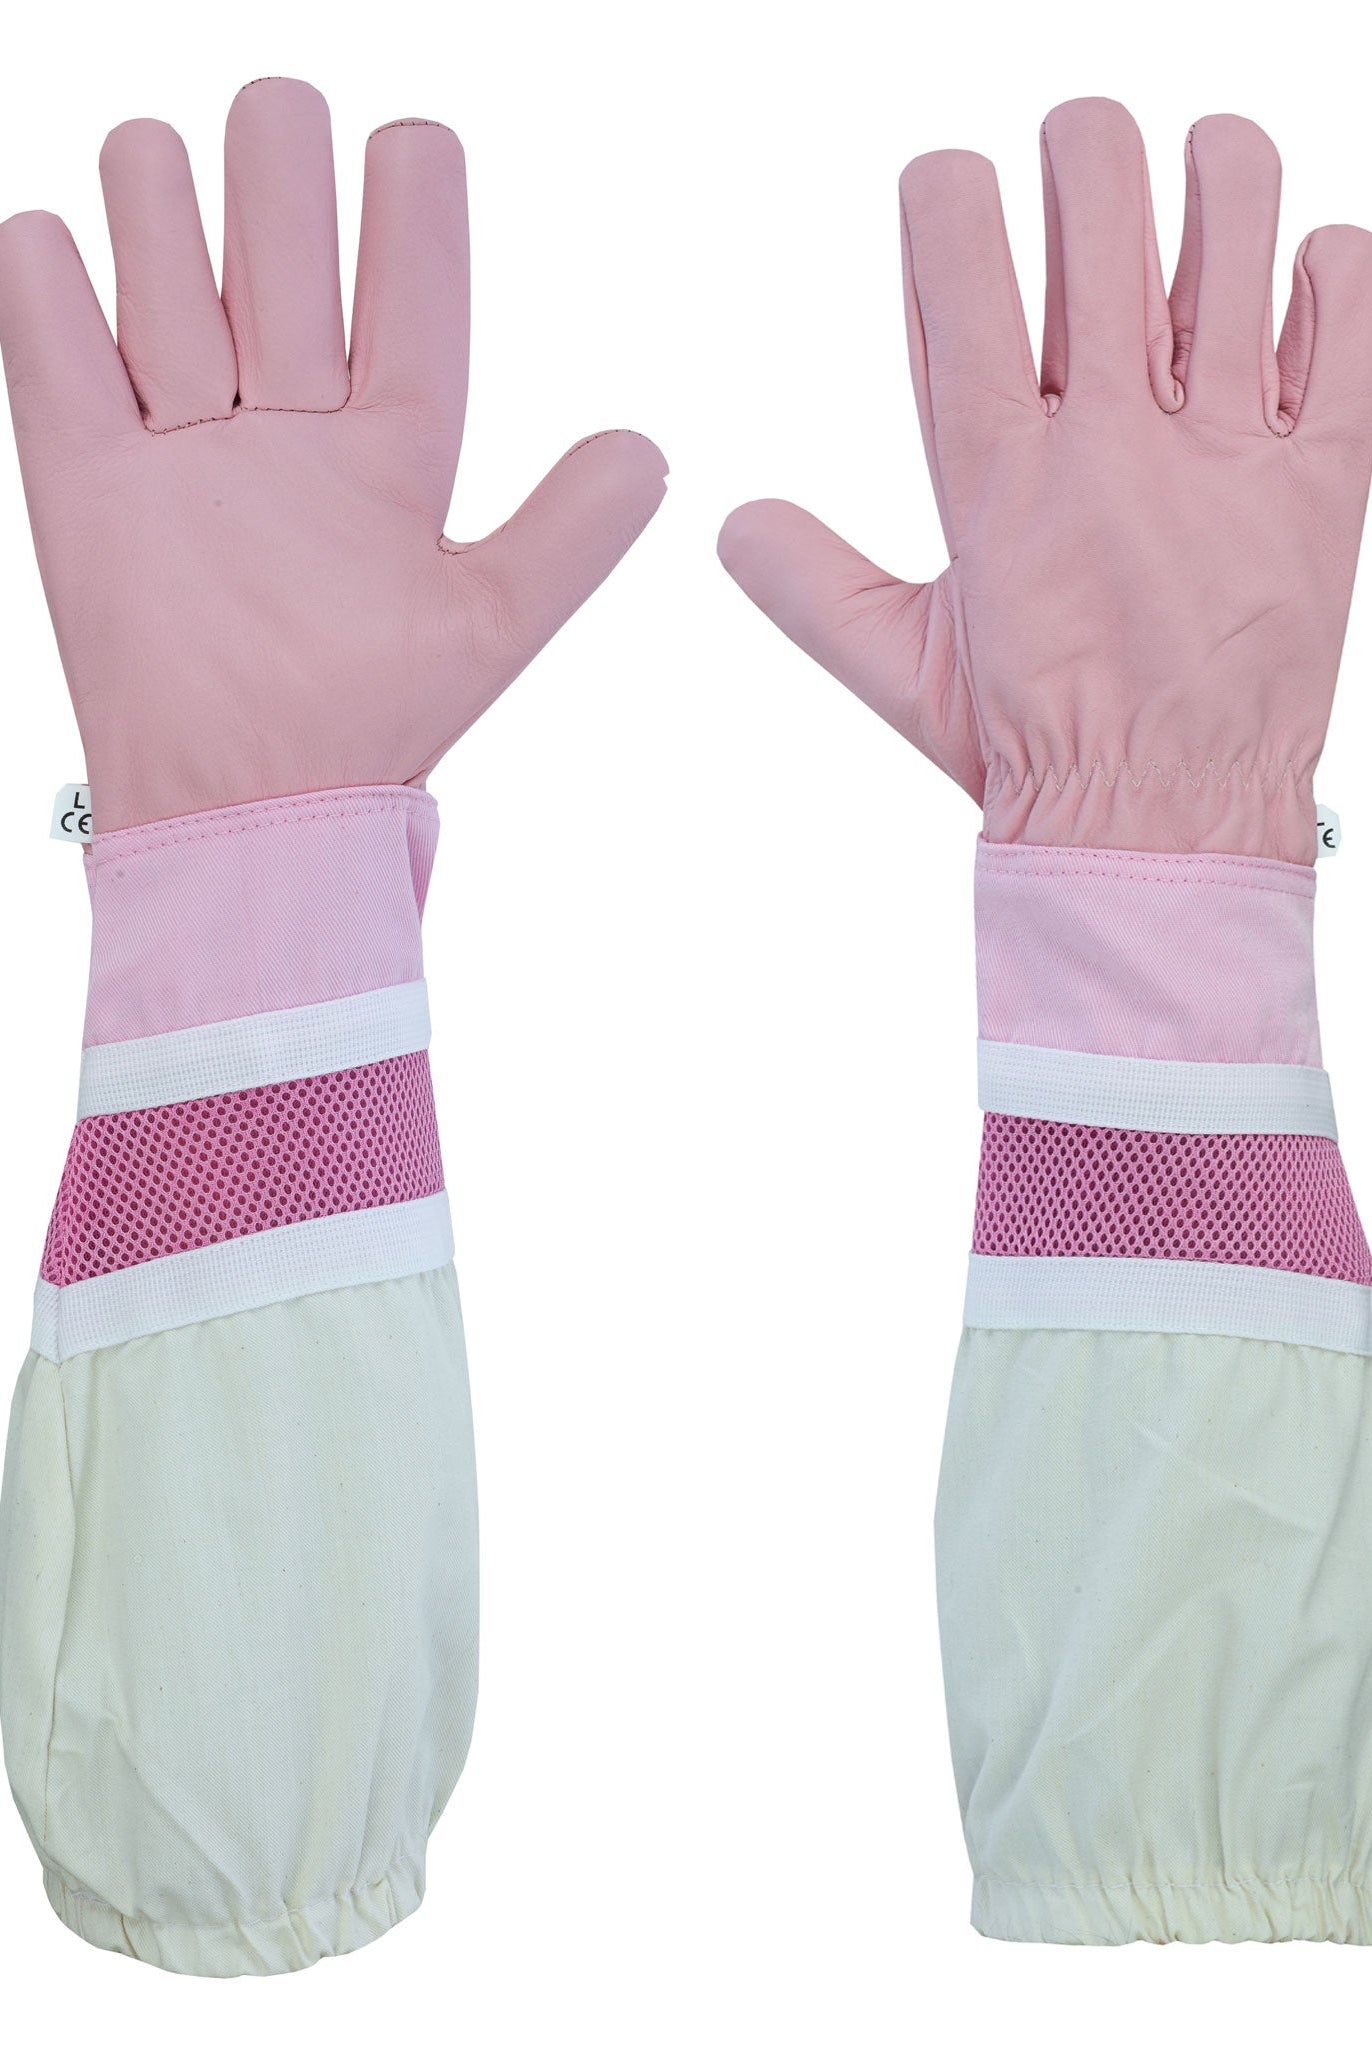 See the gloves in action – OZ ARMOUR Pink Cow Hide Ventilated Gloves providing superior protection during use.